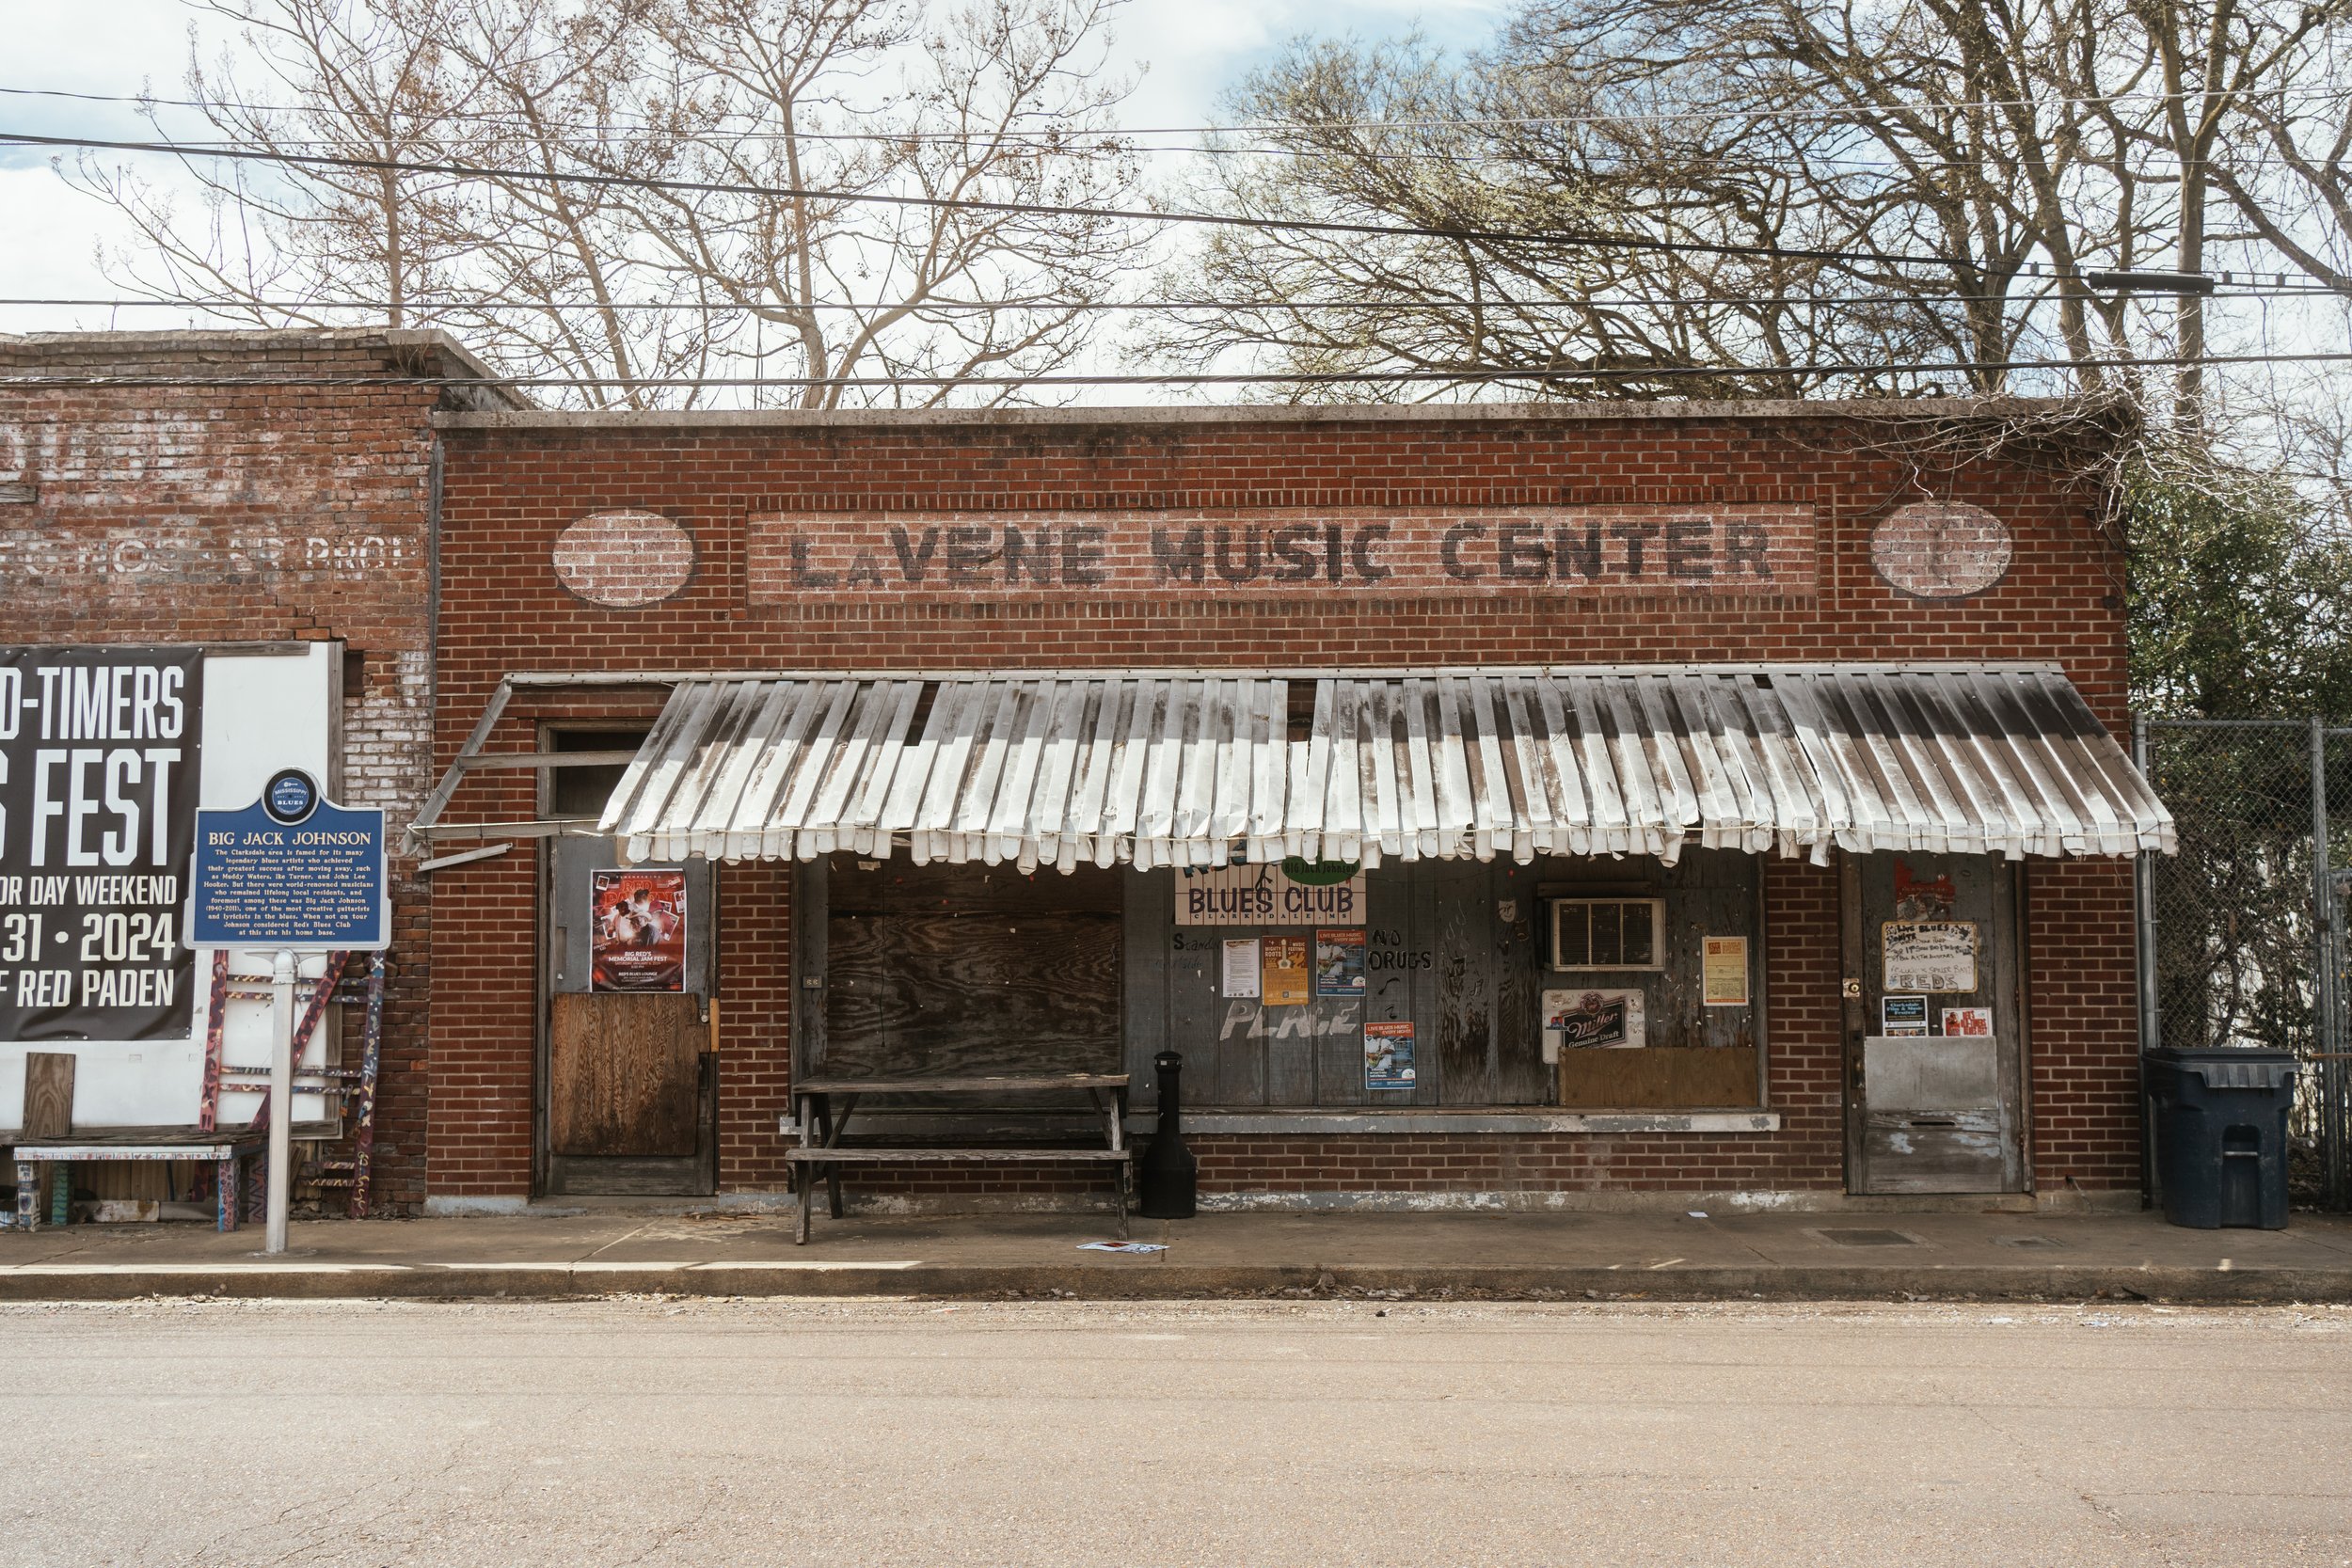 This music center has seen better days, but still stands strong next to the river.